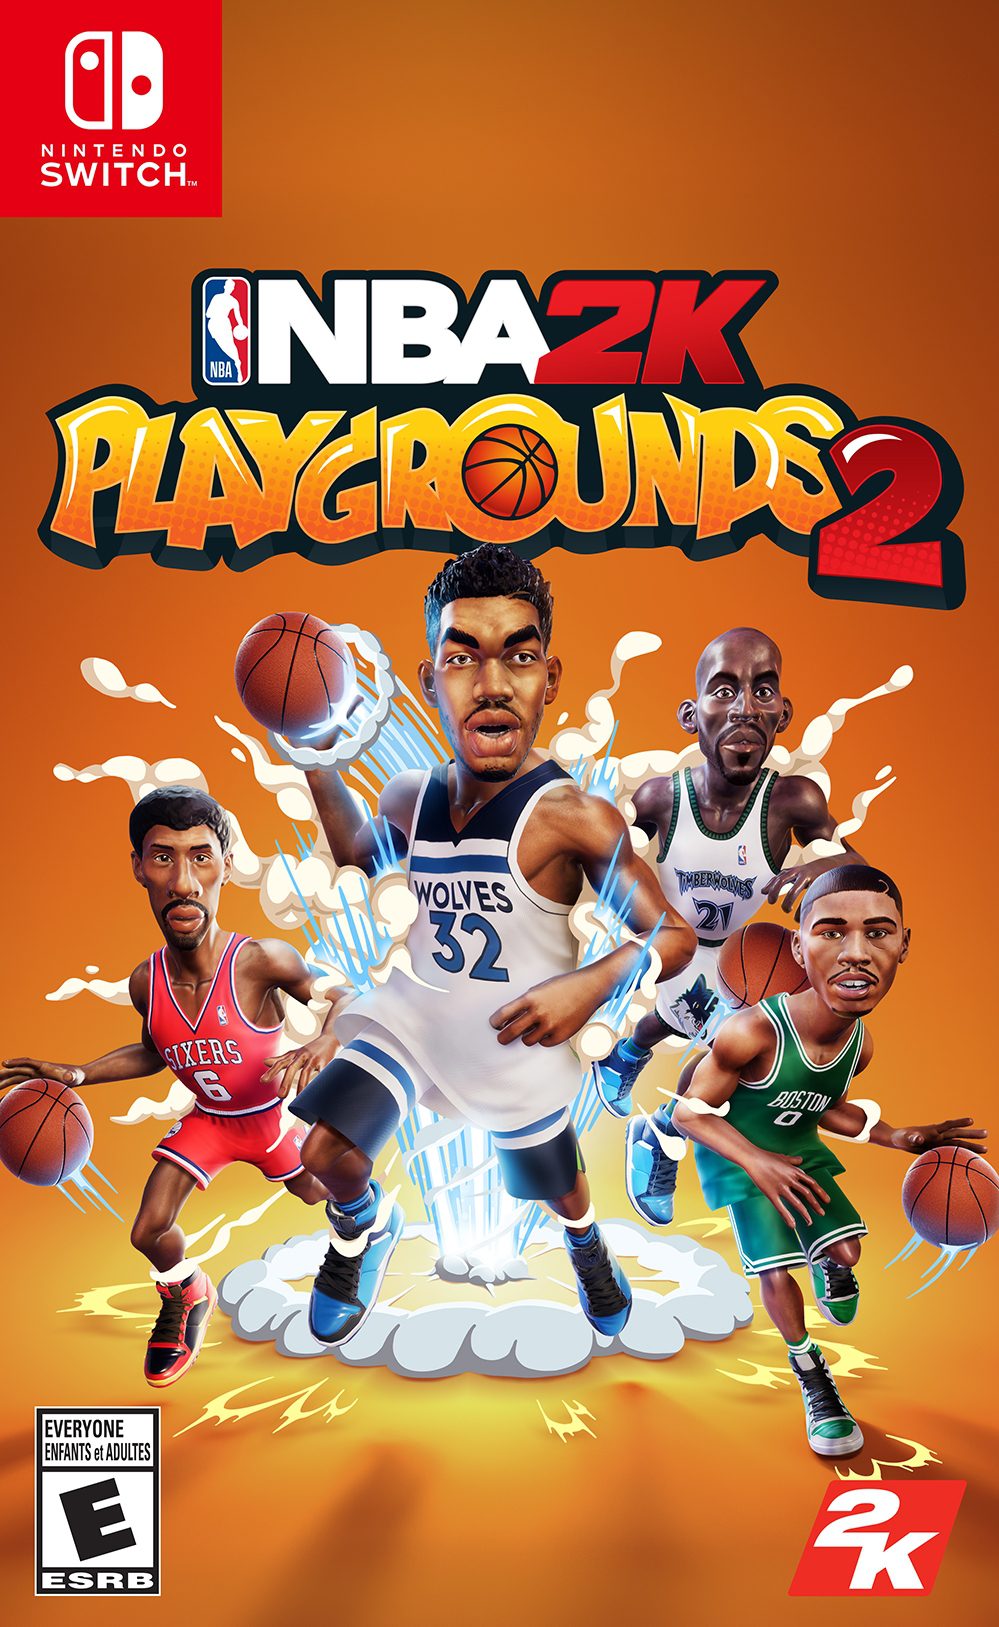 NBA 2K Playgrounds 2 for Nintendo Switch